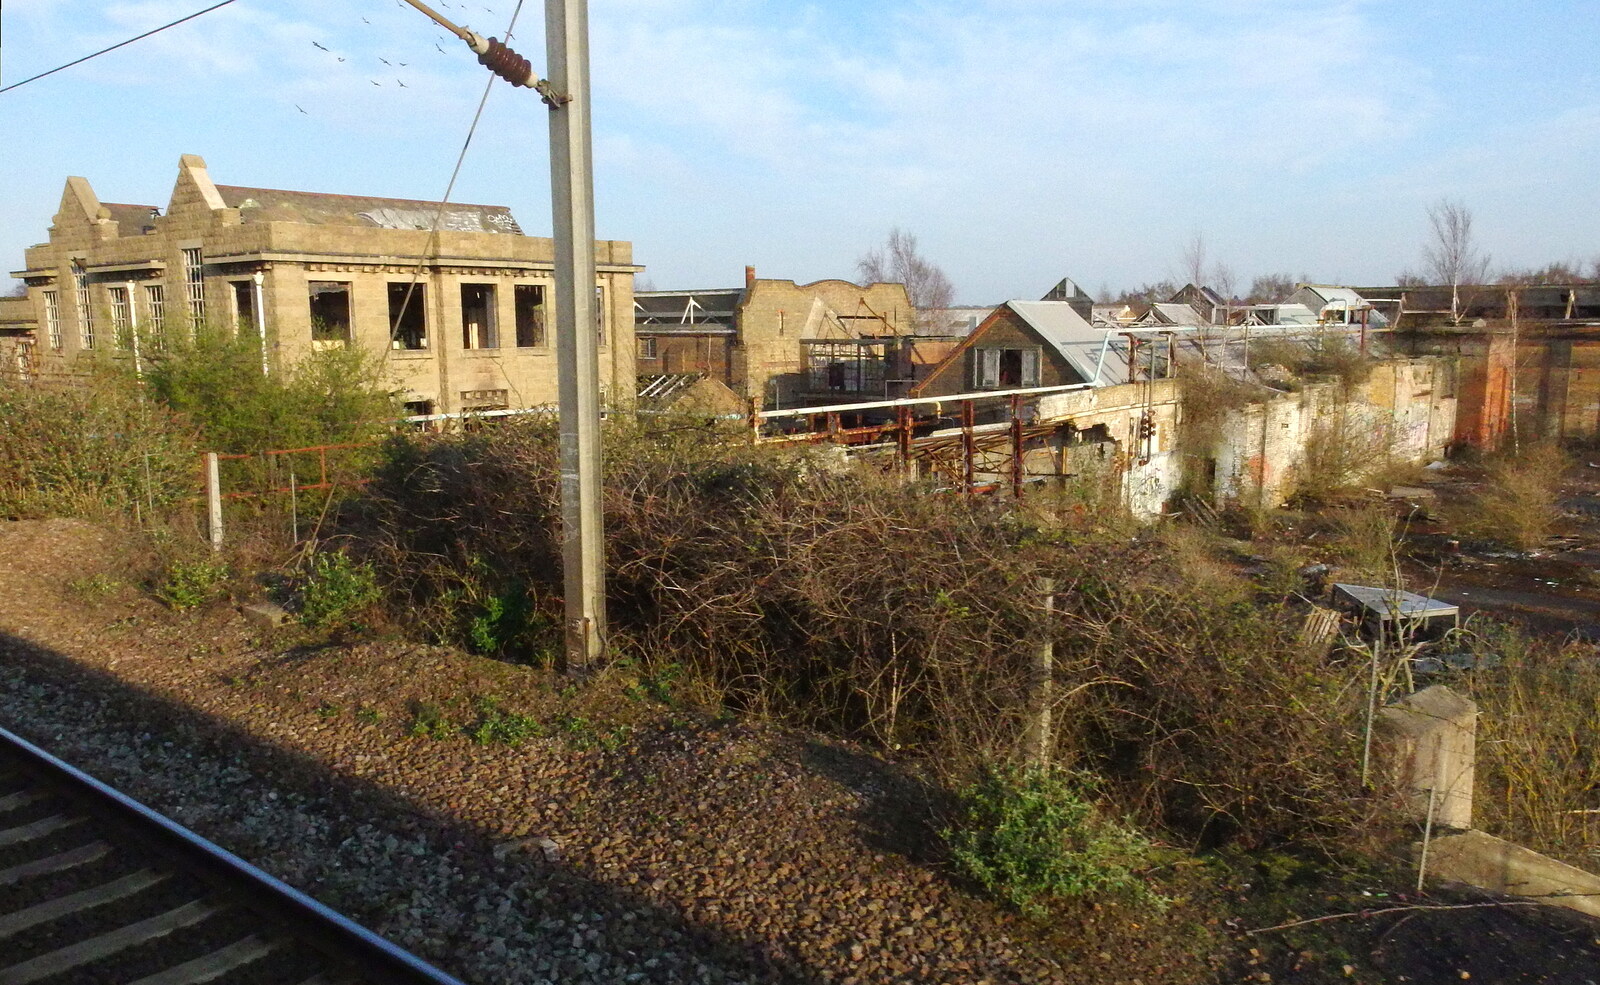 Derelict factory buildings at Brantham, near Manningtree from A Trainey Sort of Week, Liverpool Street, City of London - 3rd April 2014